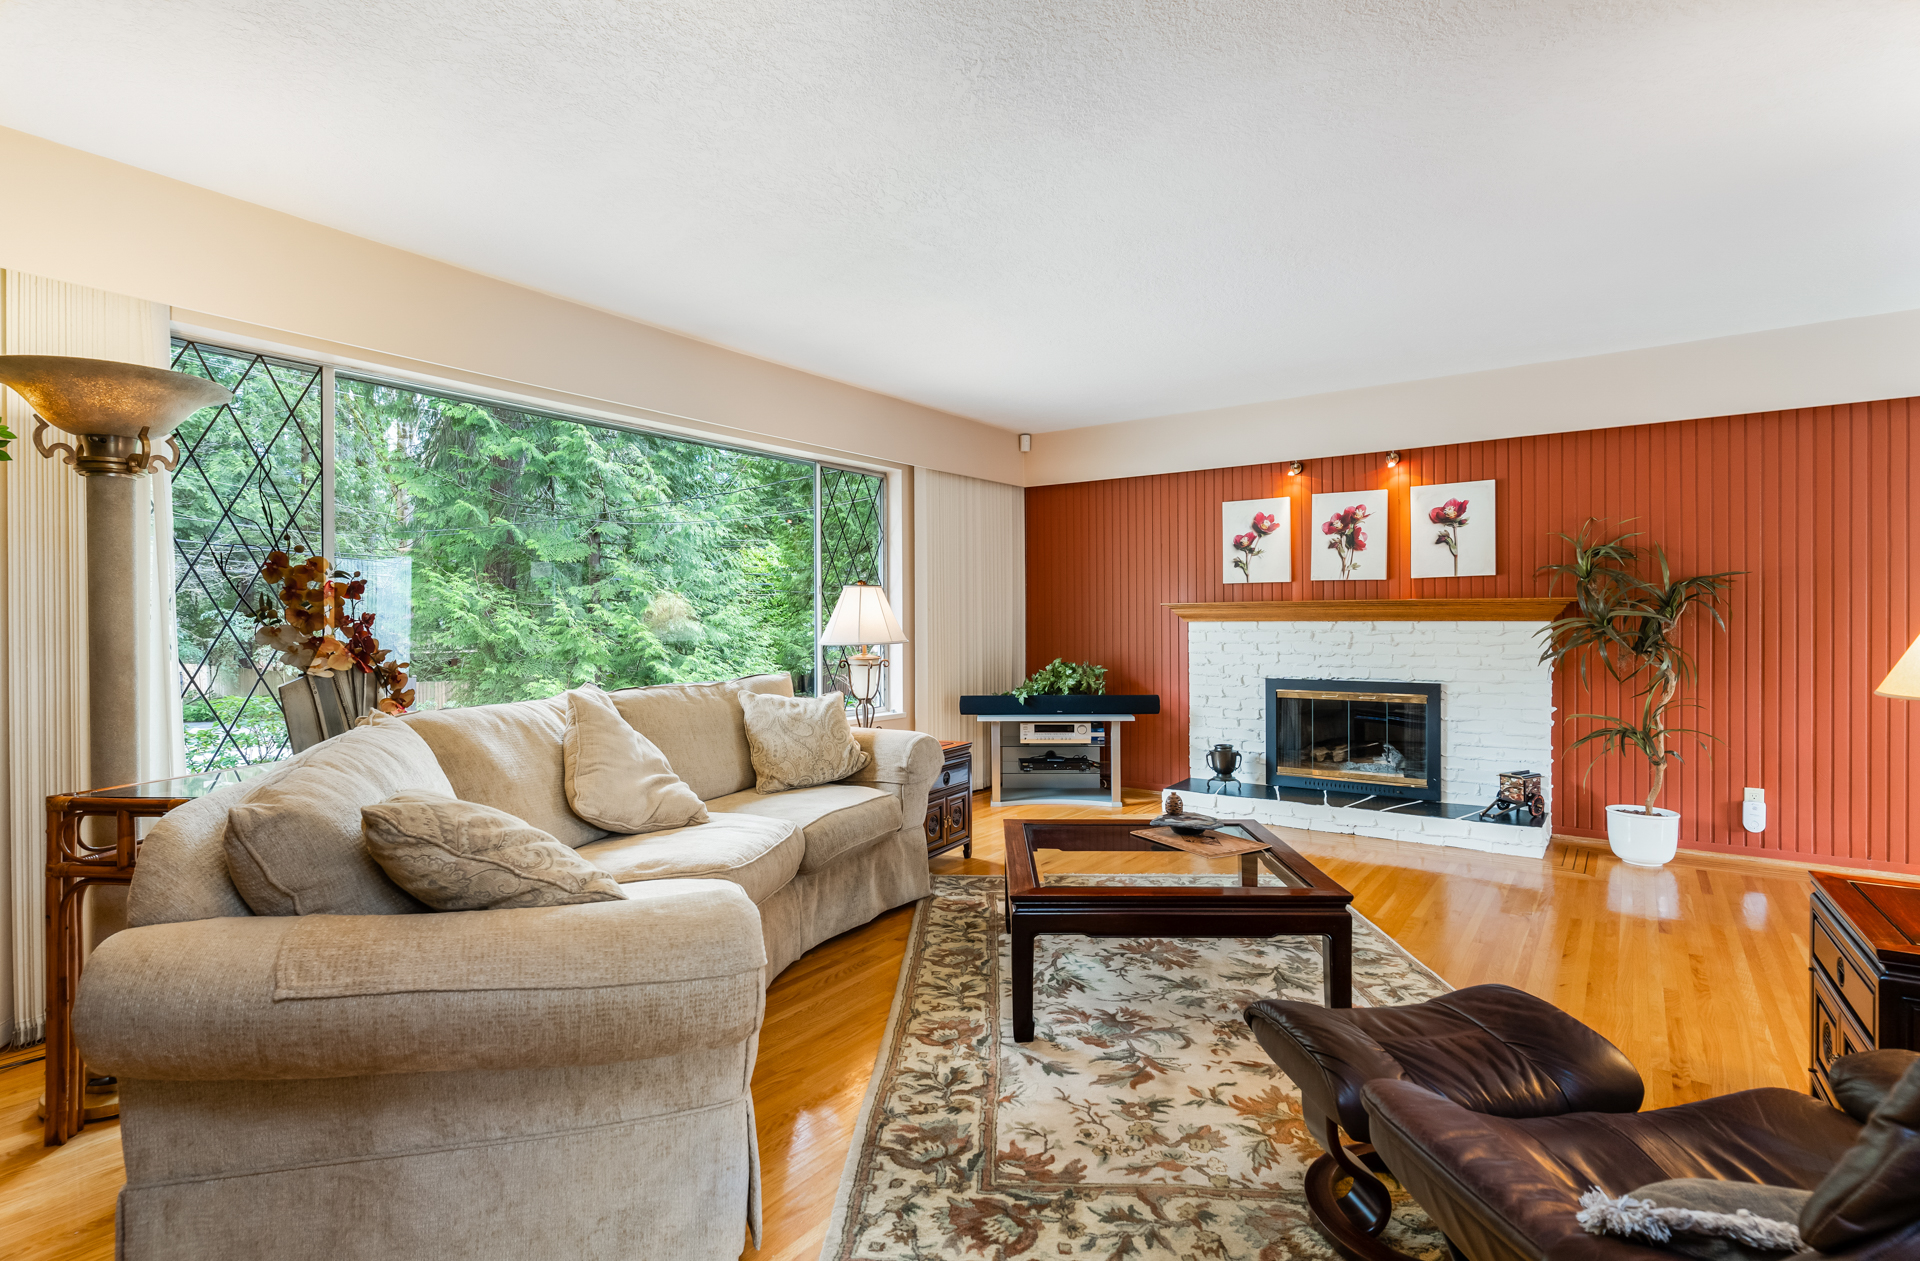 4345 Capilano Road, North Vancouver - For Sale - Image 1